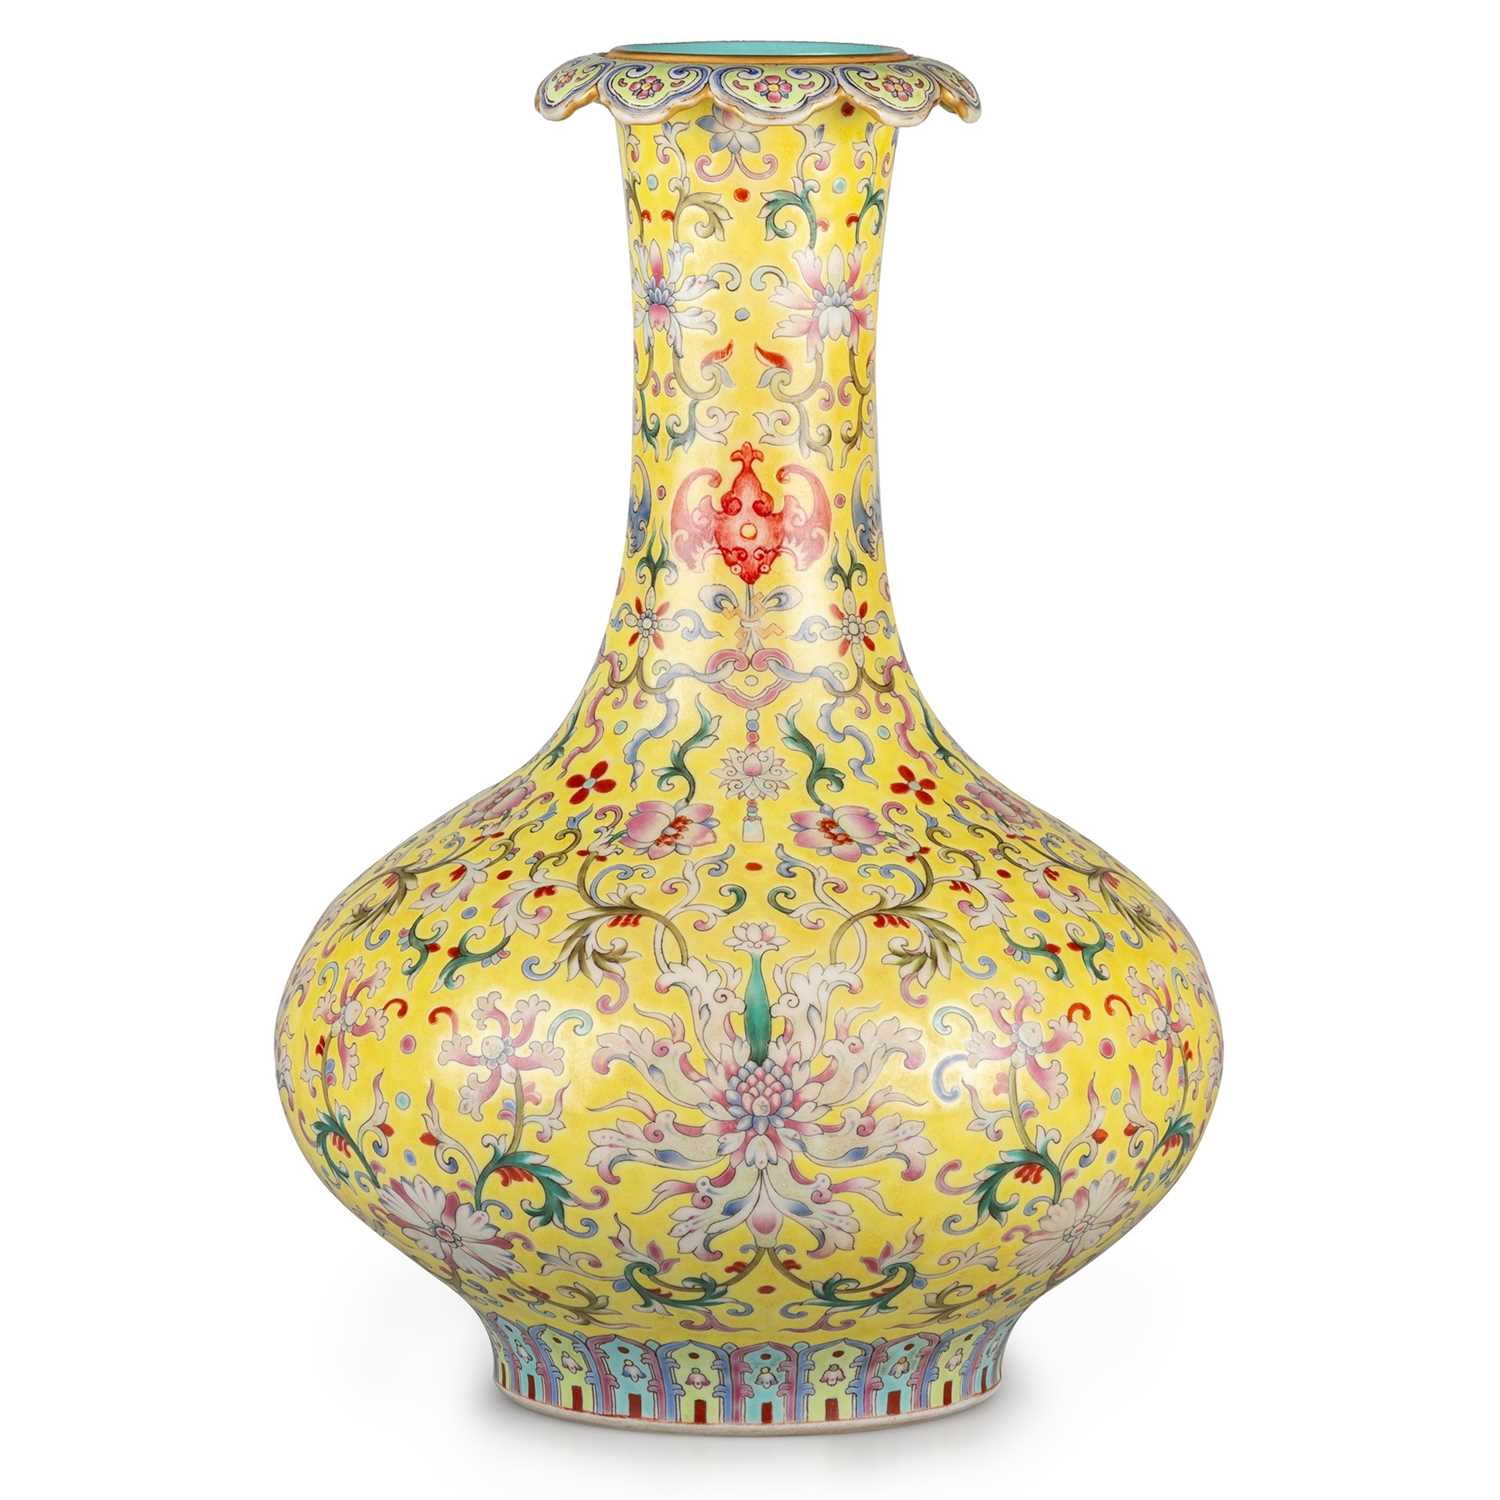 A CHINESE FAMILLE ROSE YELLOW-GROUND BOTTLE VASE